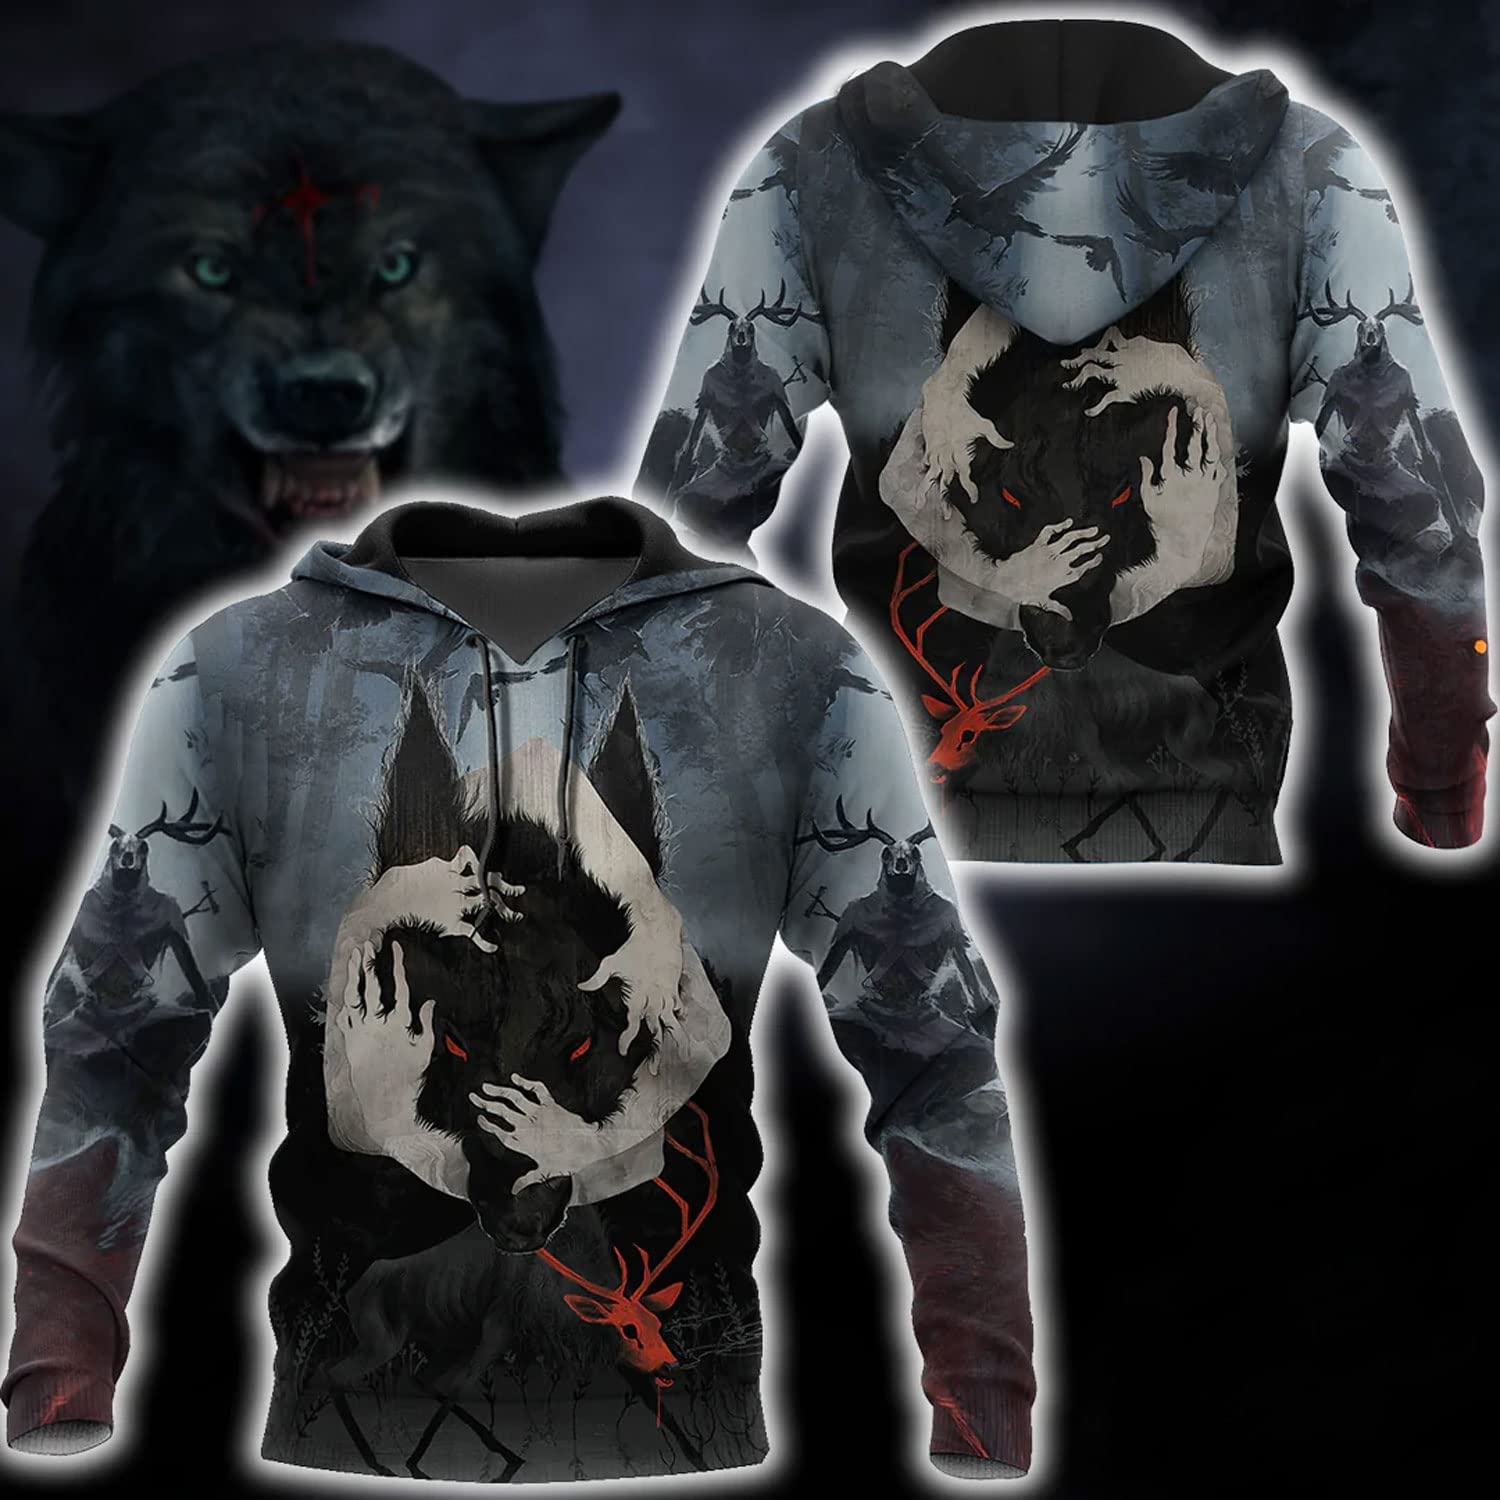 Wolf Winter Lover: The Insane W.o.l.f 3D Hoodie with All-Over Print, Perfect Gift for Hunting Families, Featuring Pullover Hoodie, Hawaiian Shirt, and Sweatshirt Variants. – JOT1527